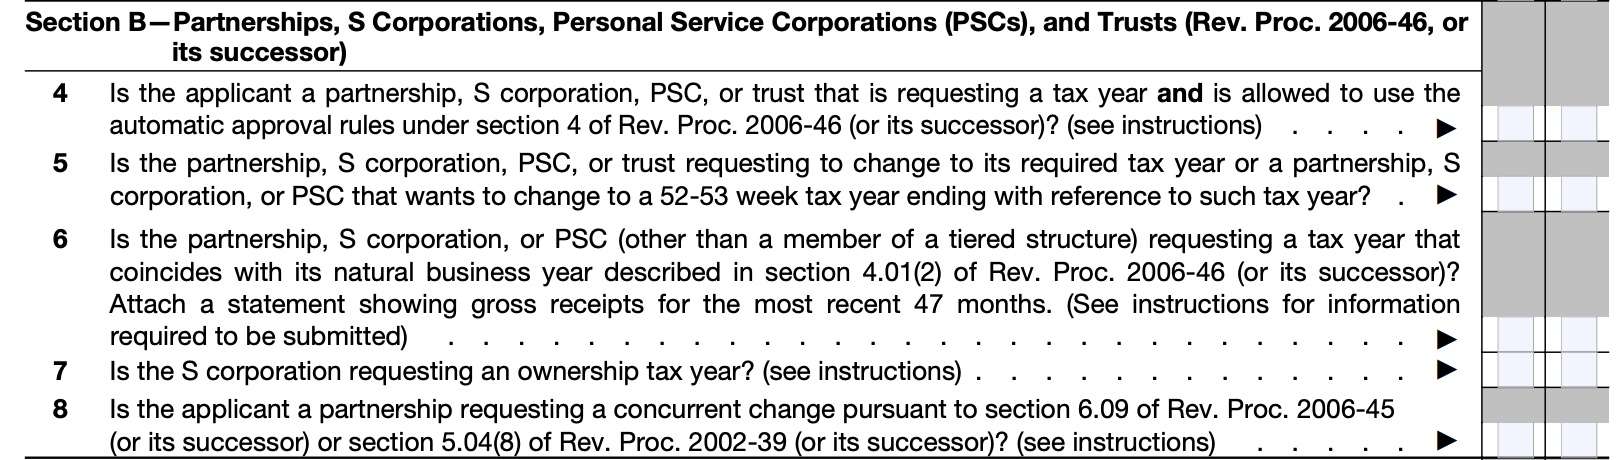 part ii, section b, partnerships, s corporations, personal service corporations and trusts